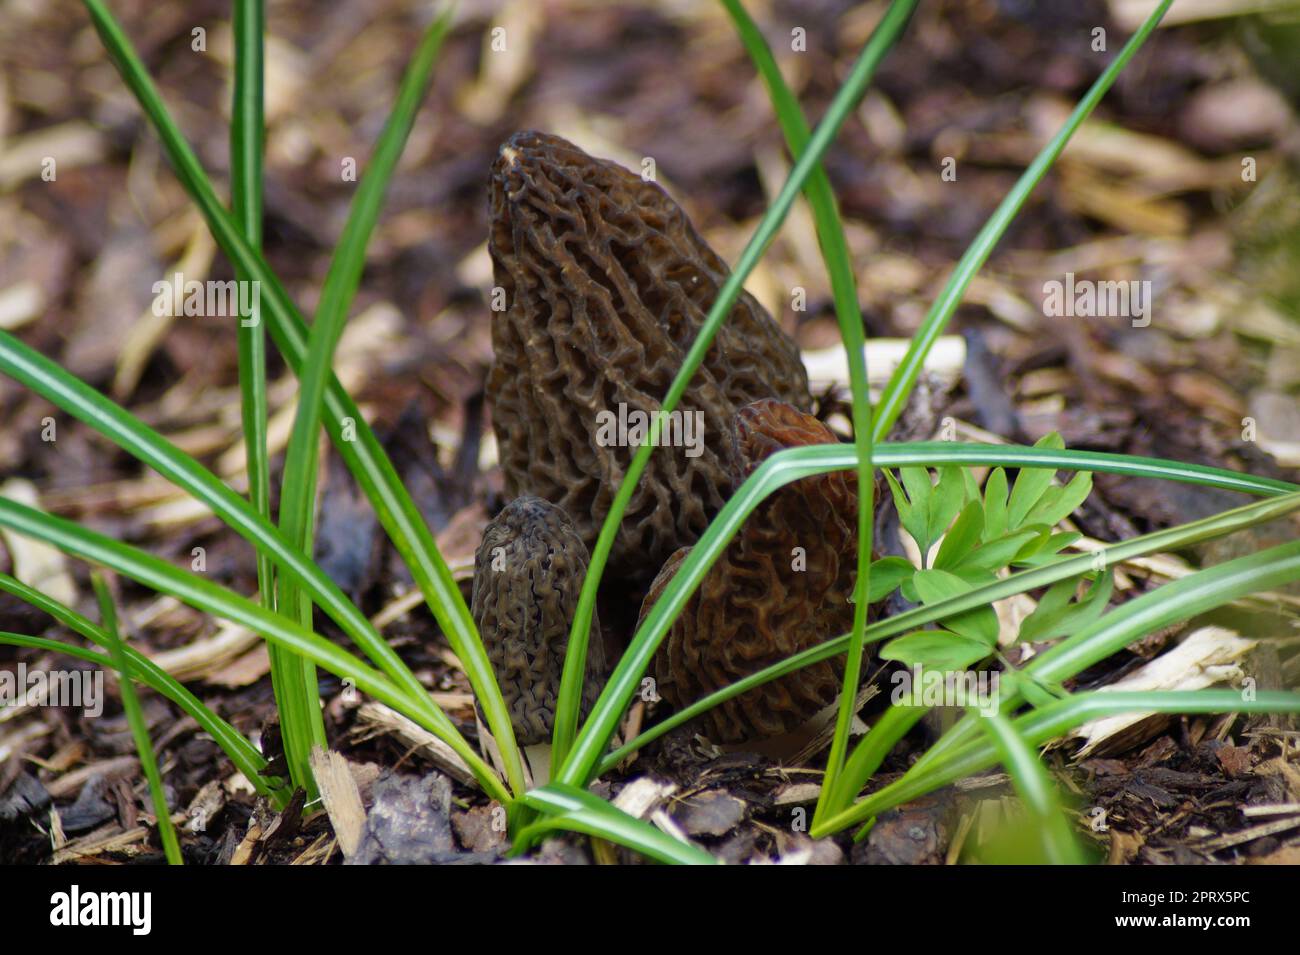 Group of pointed morels on bark mulch Stock Photo